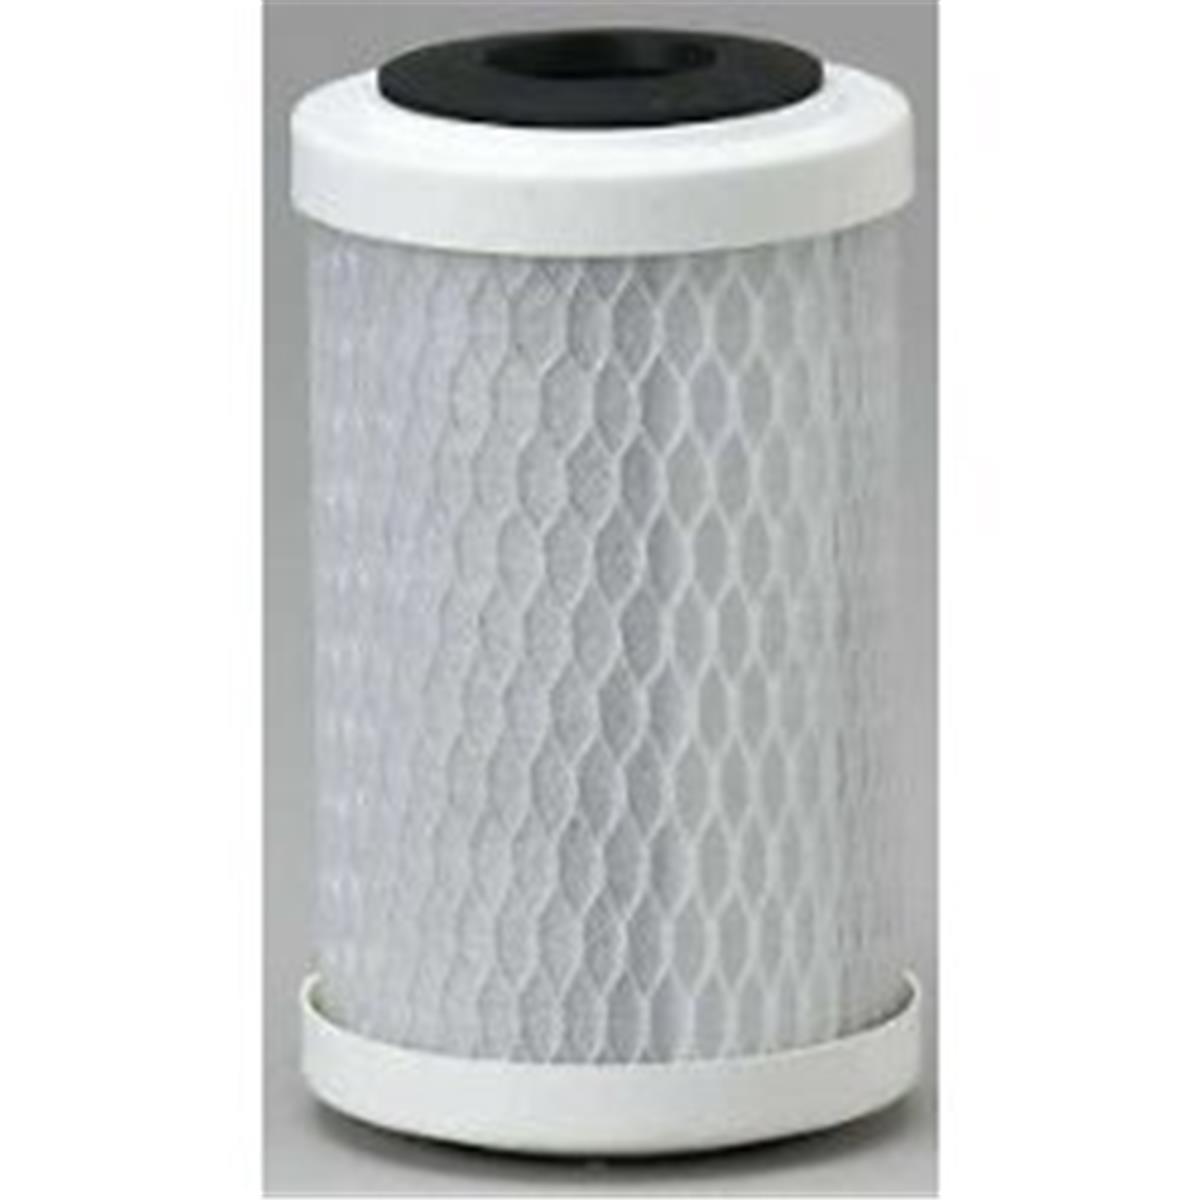 Nsf Carbon Block Filter 2.5 In. Od X 4.87 In. Length, 5 Micron